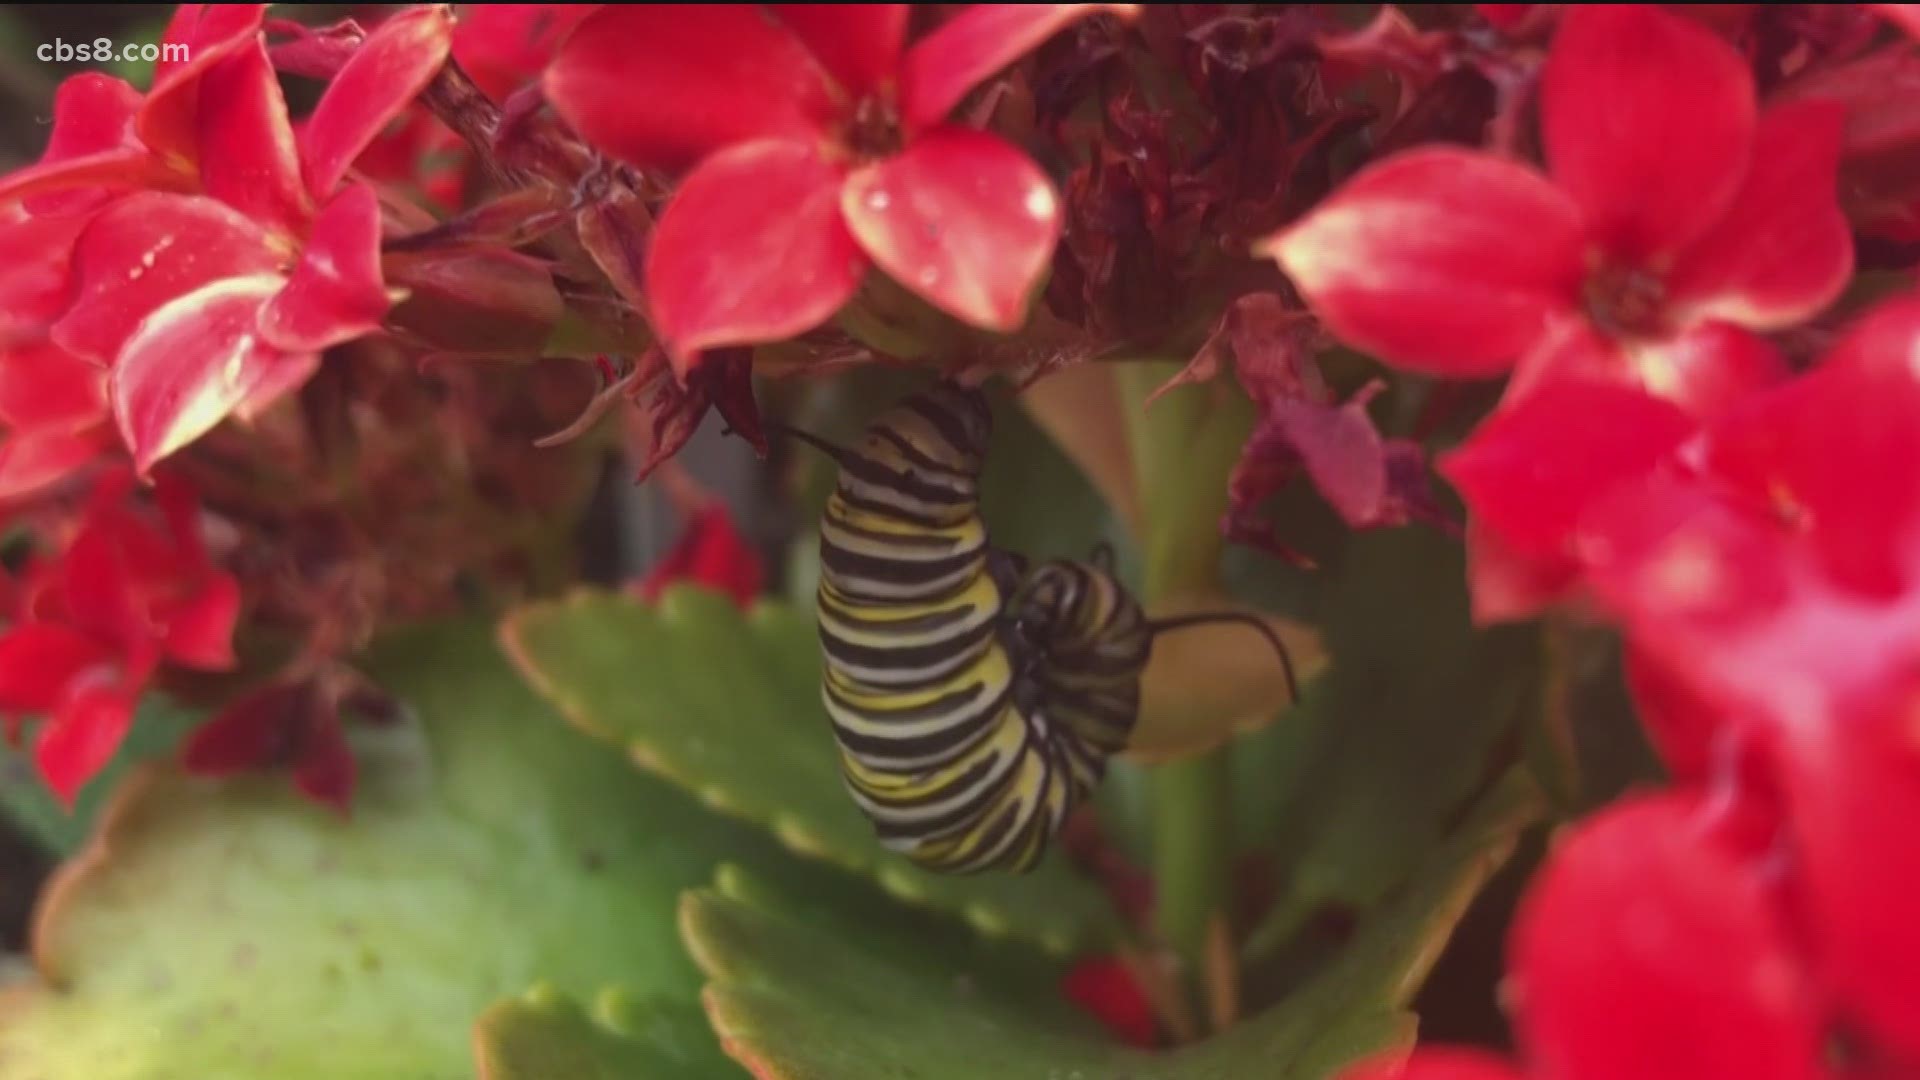 The Four Seasons has planted a butterfly garden right in the middle of the Seasons Restaurant.